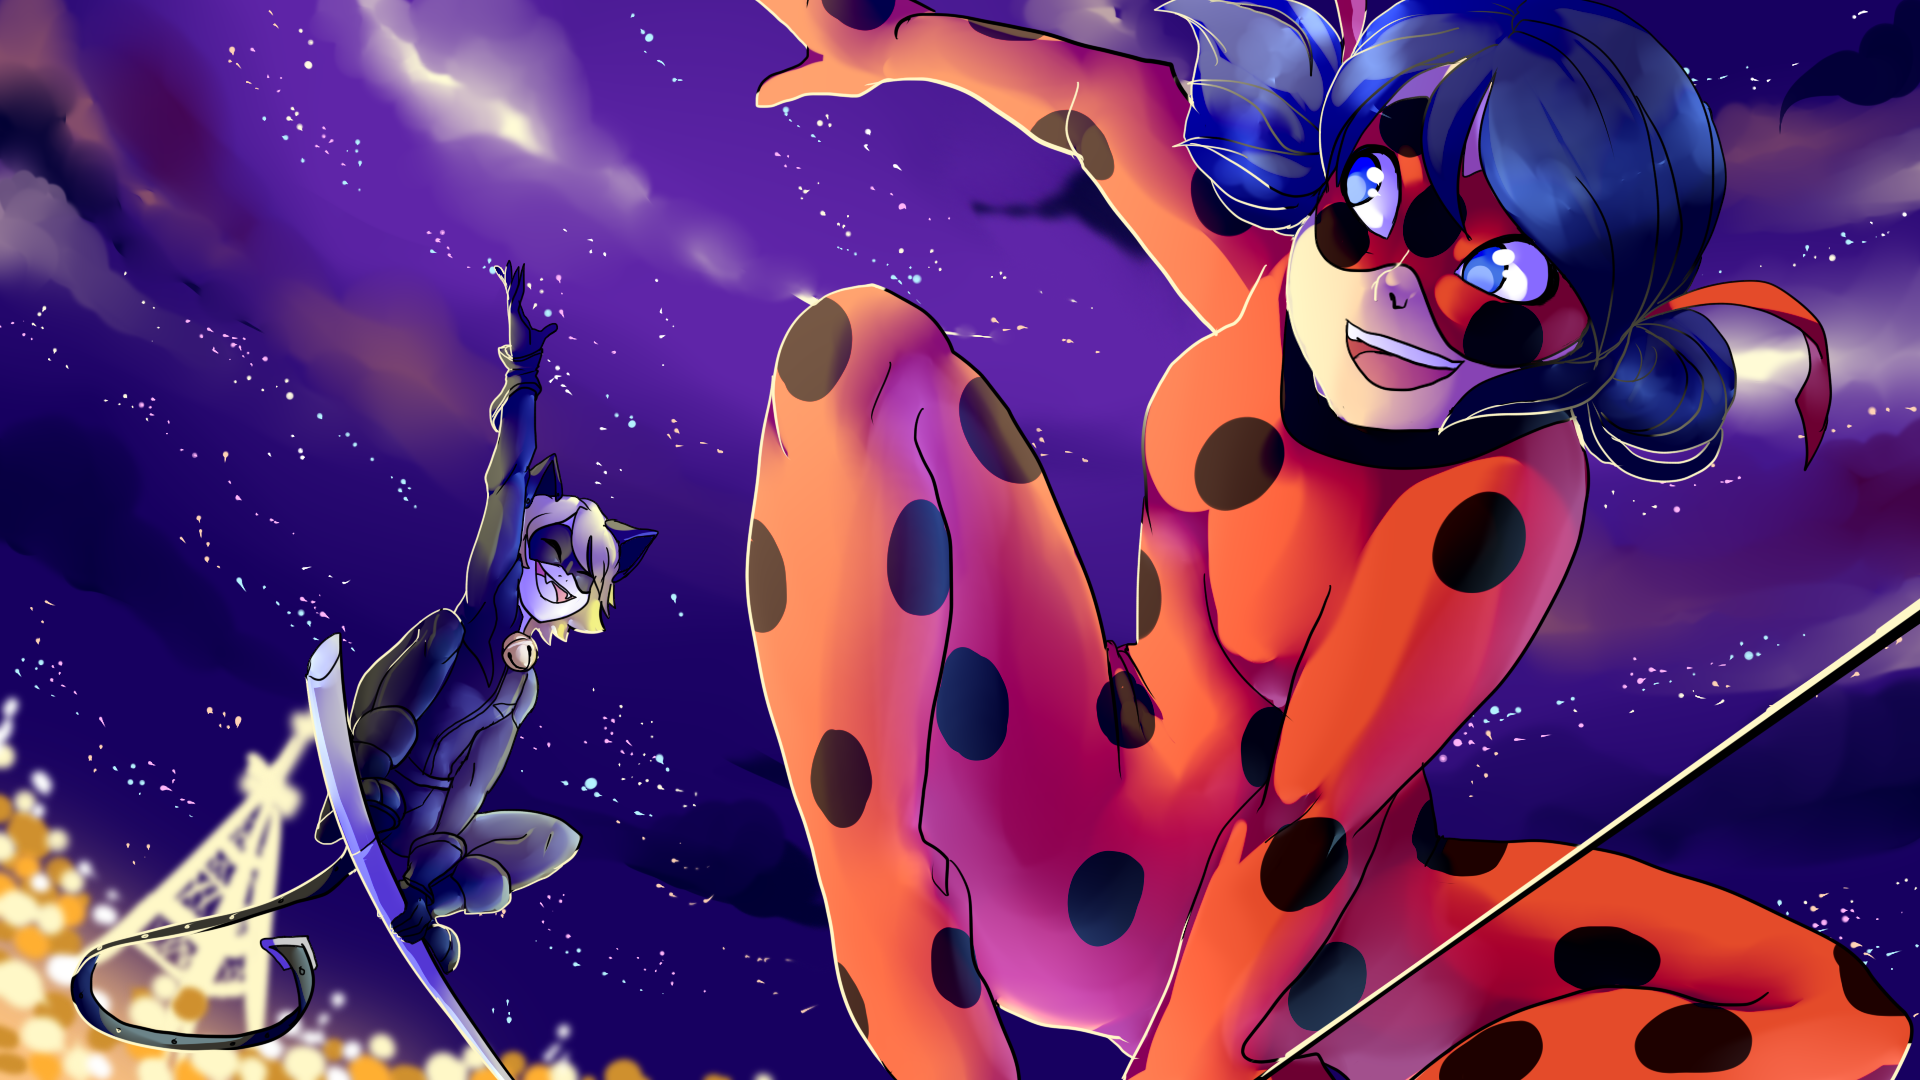 Miraculous Ladybug Background posted .cutewallpaper.org